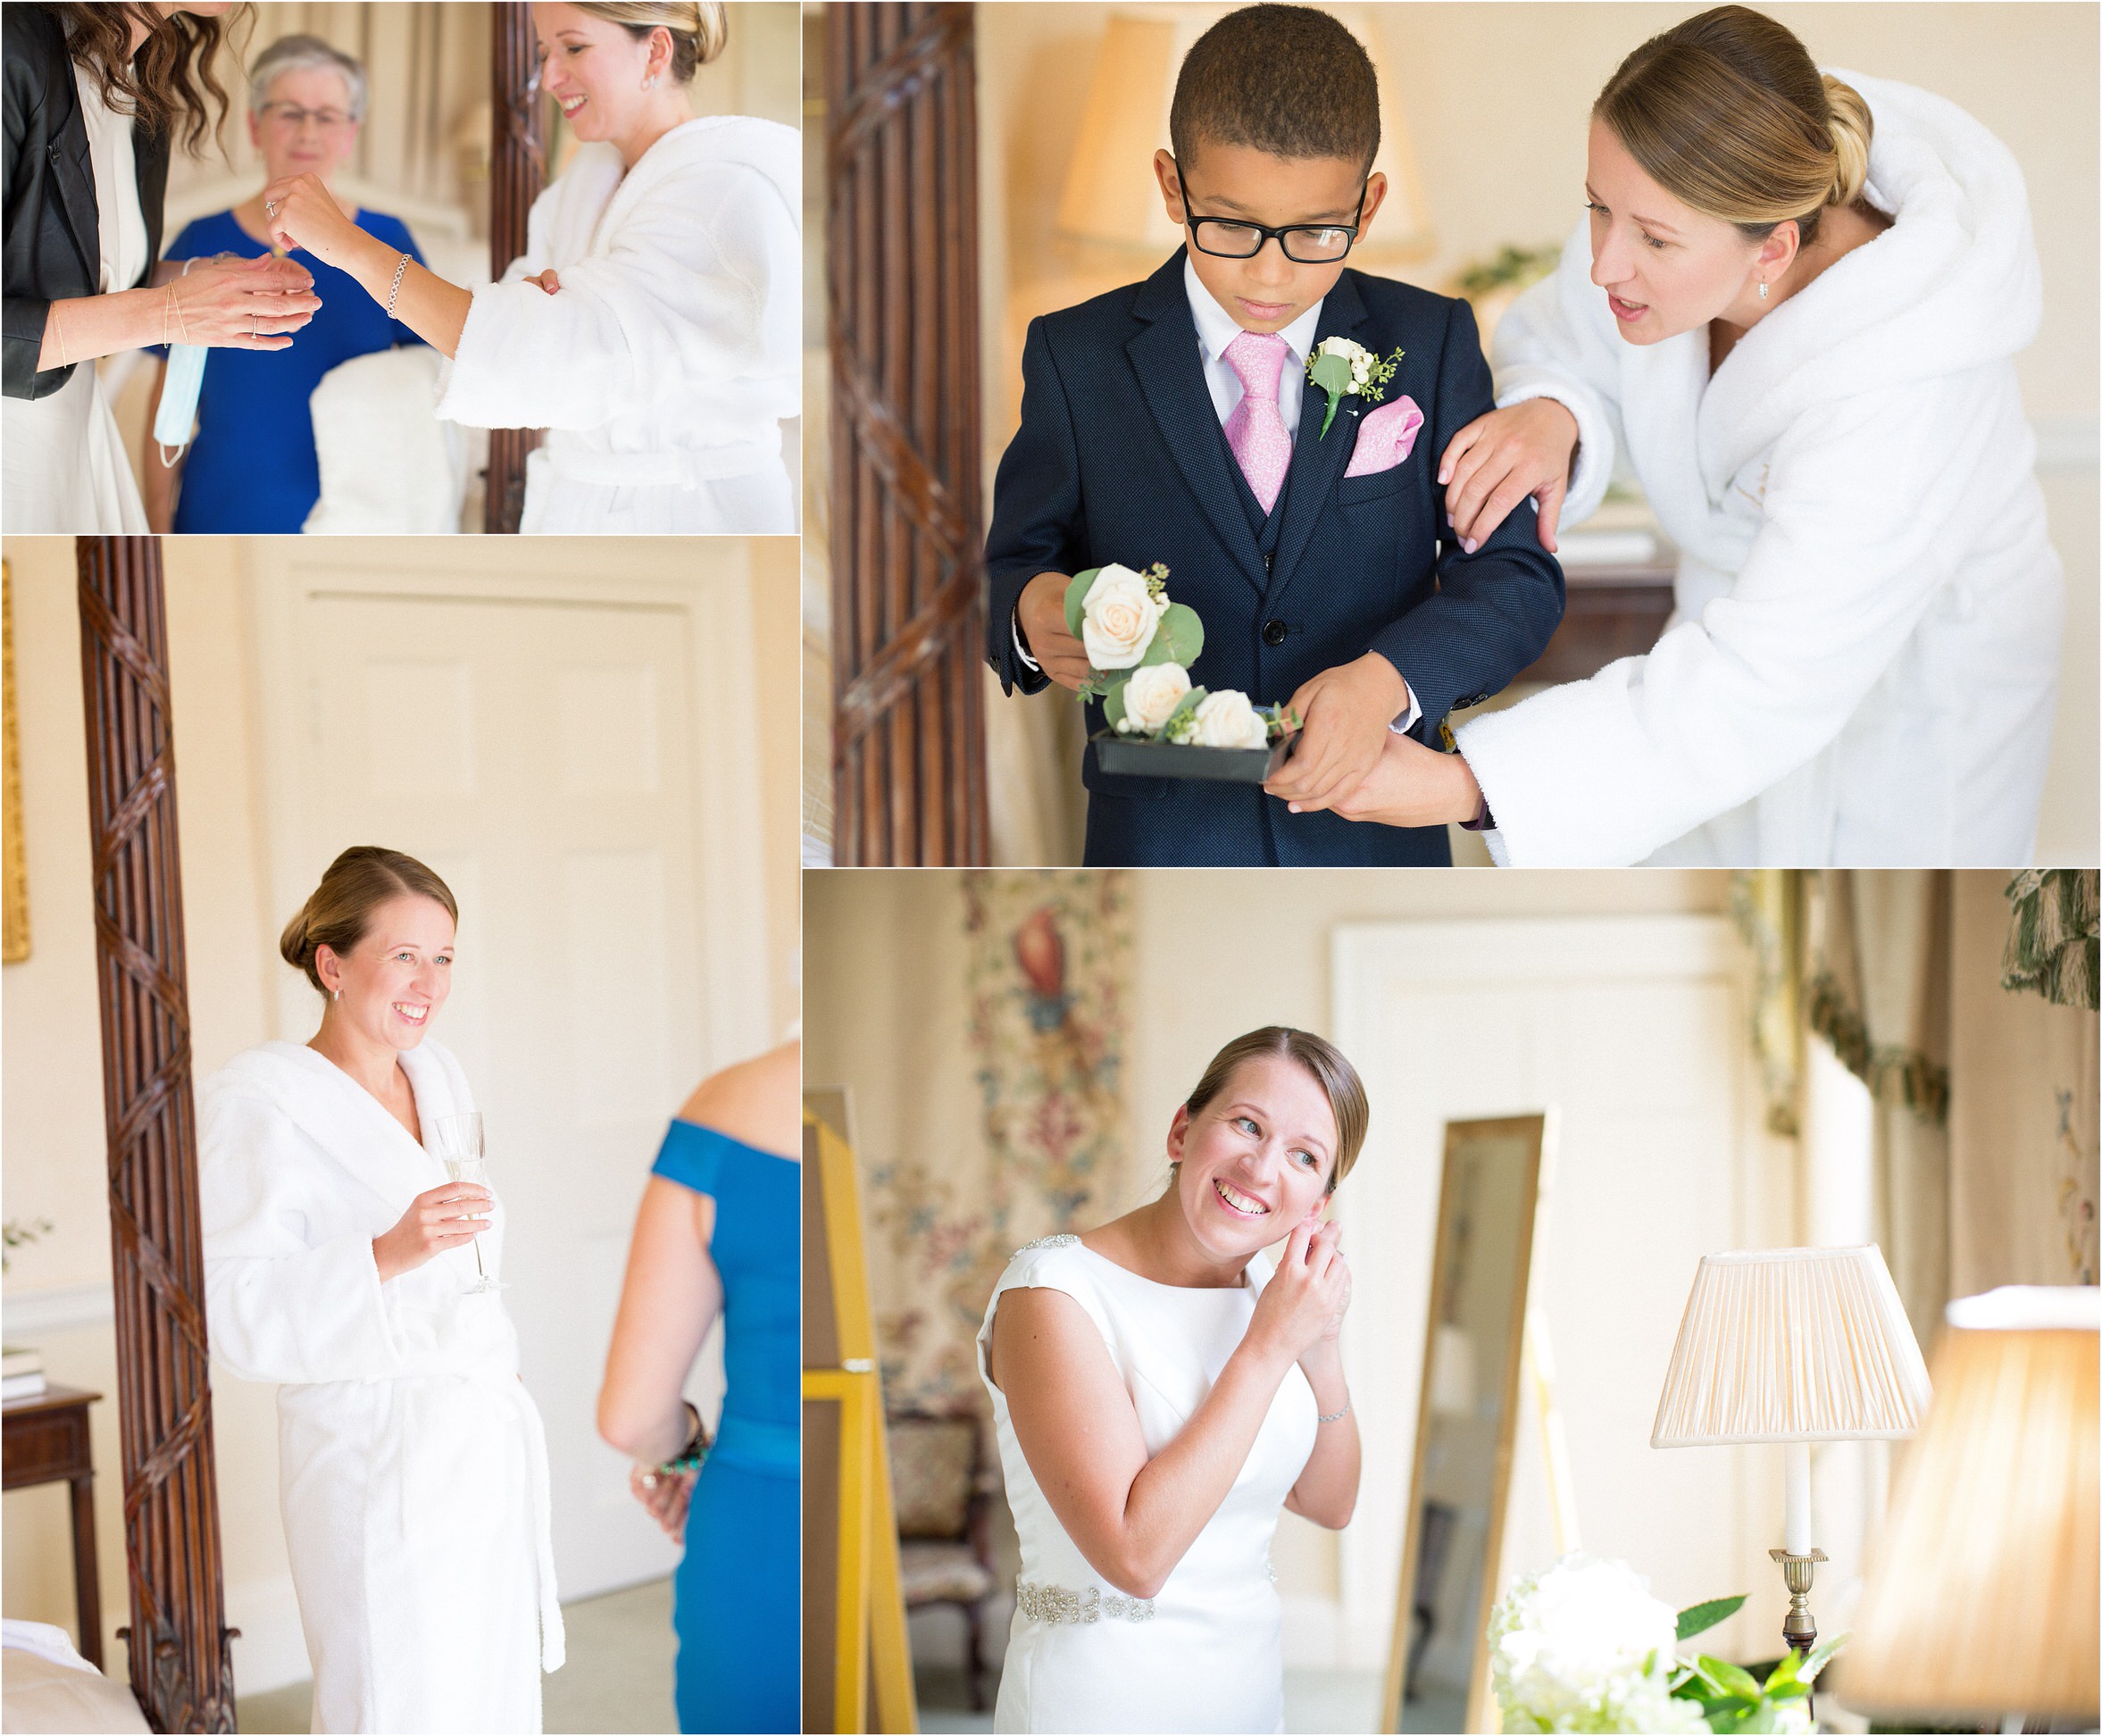 Bride getting ready for an intimate wedding at Ugbrooke House